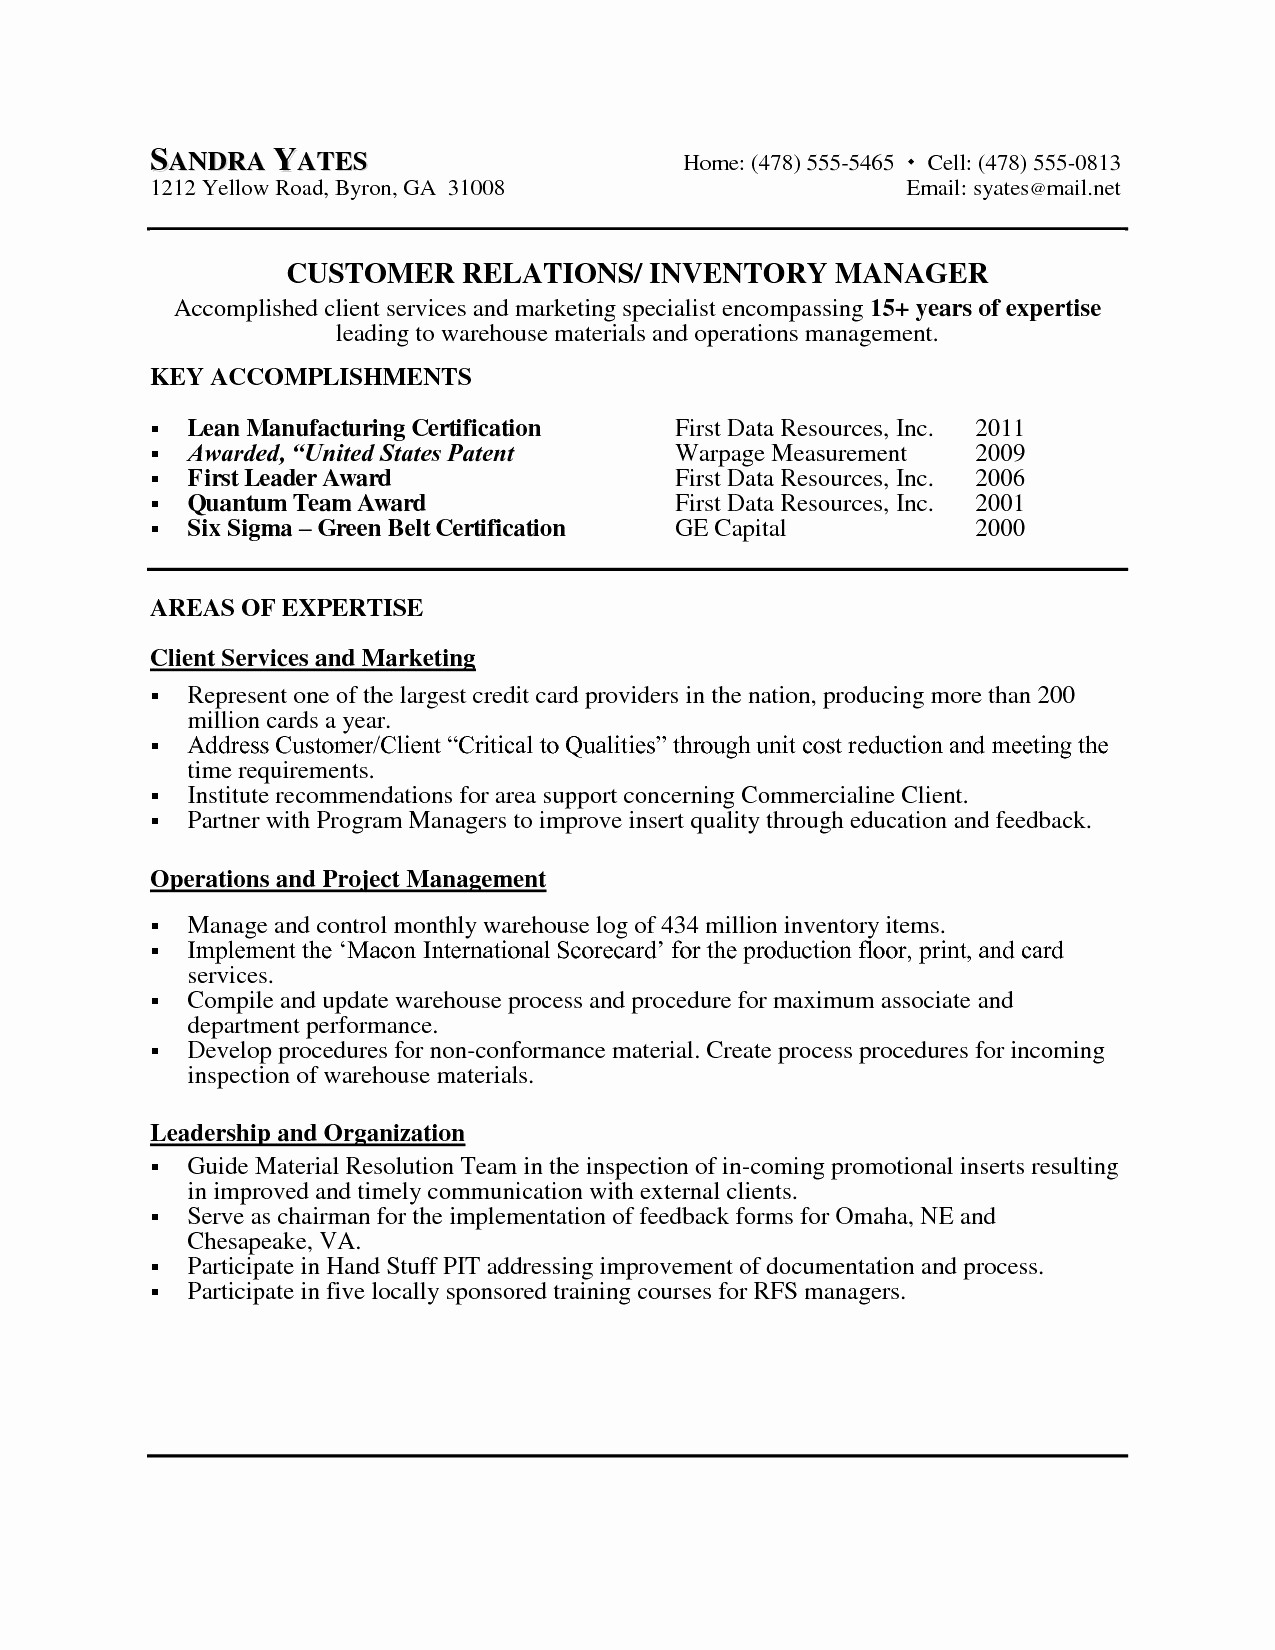 Resume Letter Template - Cover Letter Examples for Resumes Luxury 20 Resume with Cover Letter